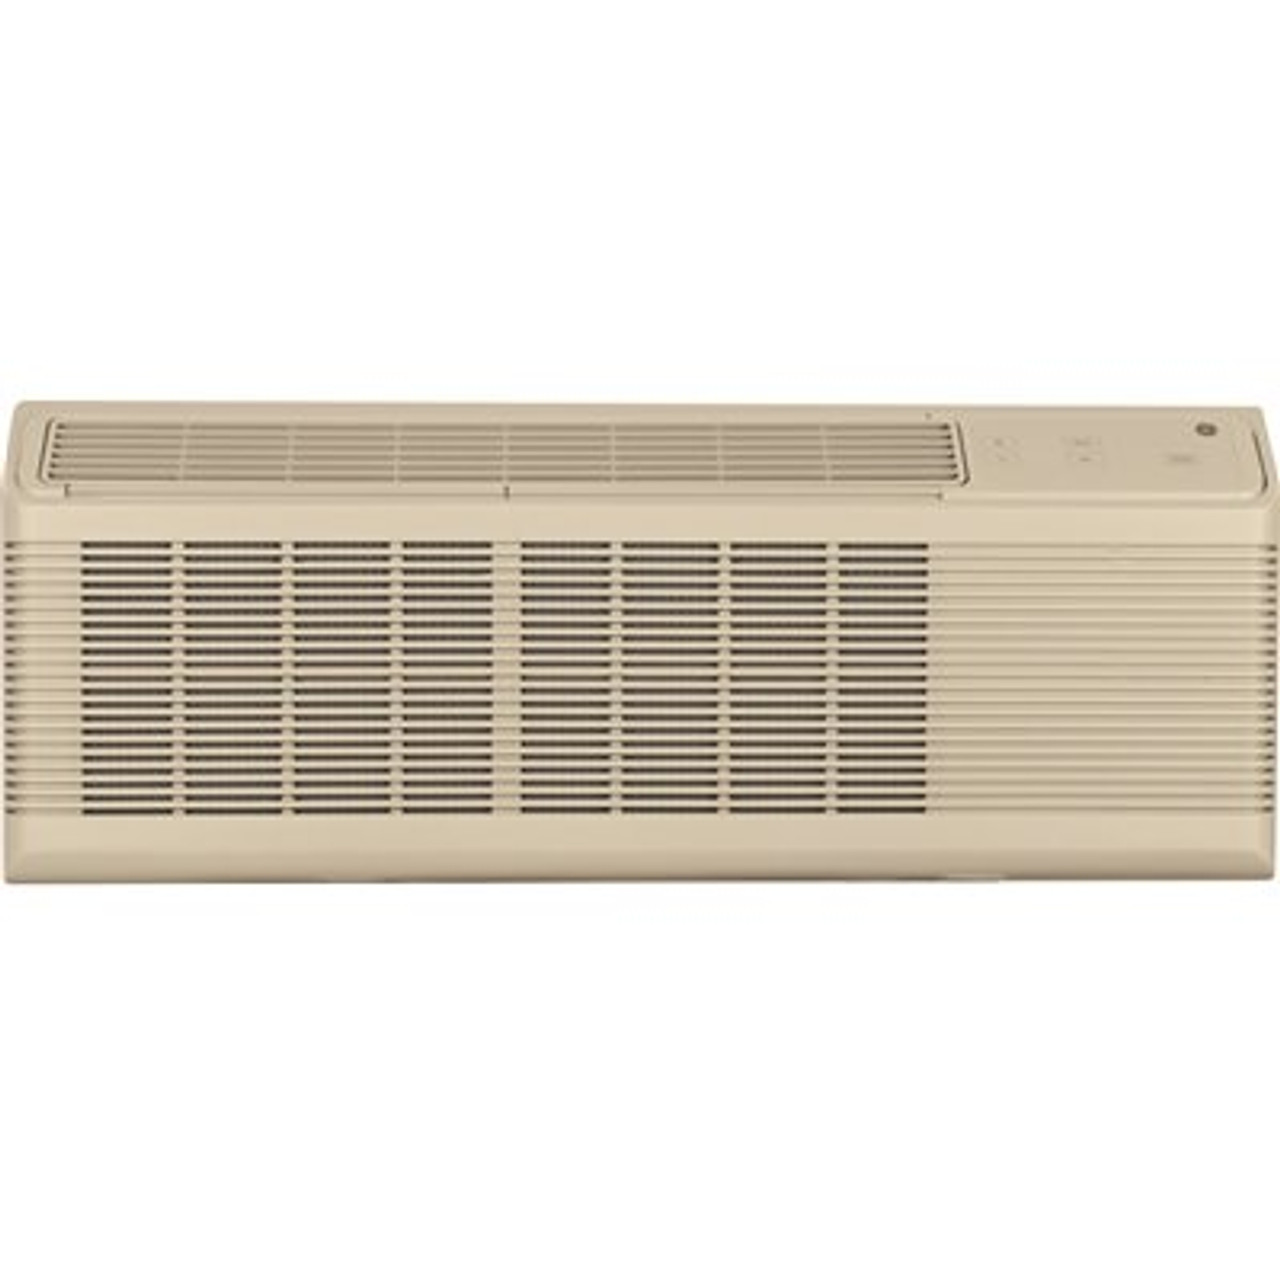 GE GE ZONELINE COOLING AND ELECTRIC HEAT UNIT WITH CORROSION PROTECTION, 9700 BTU, 265 VOLT